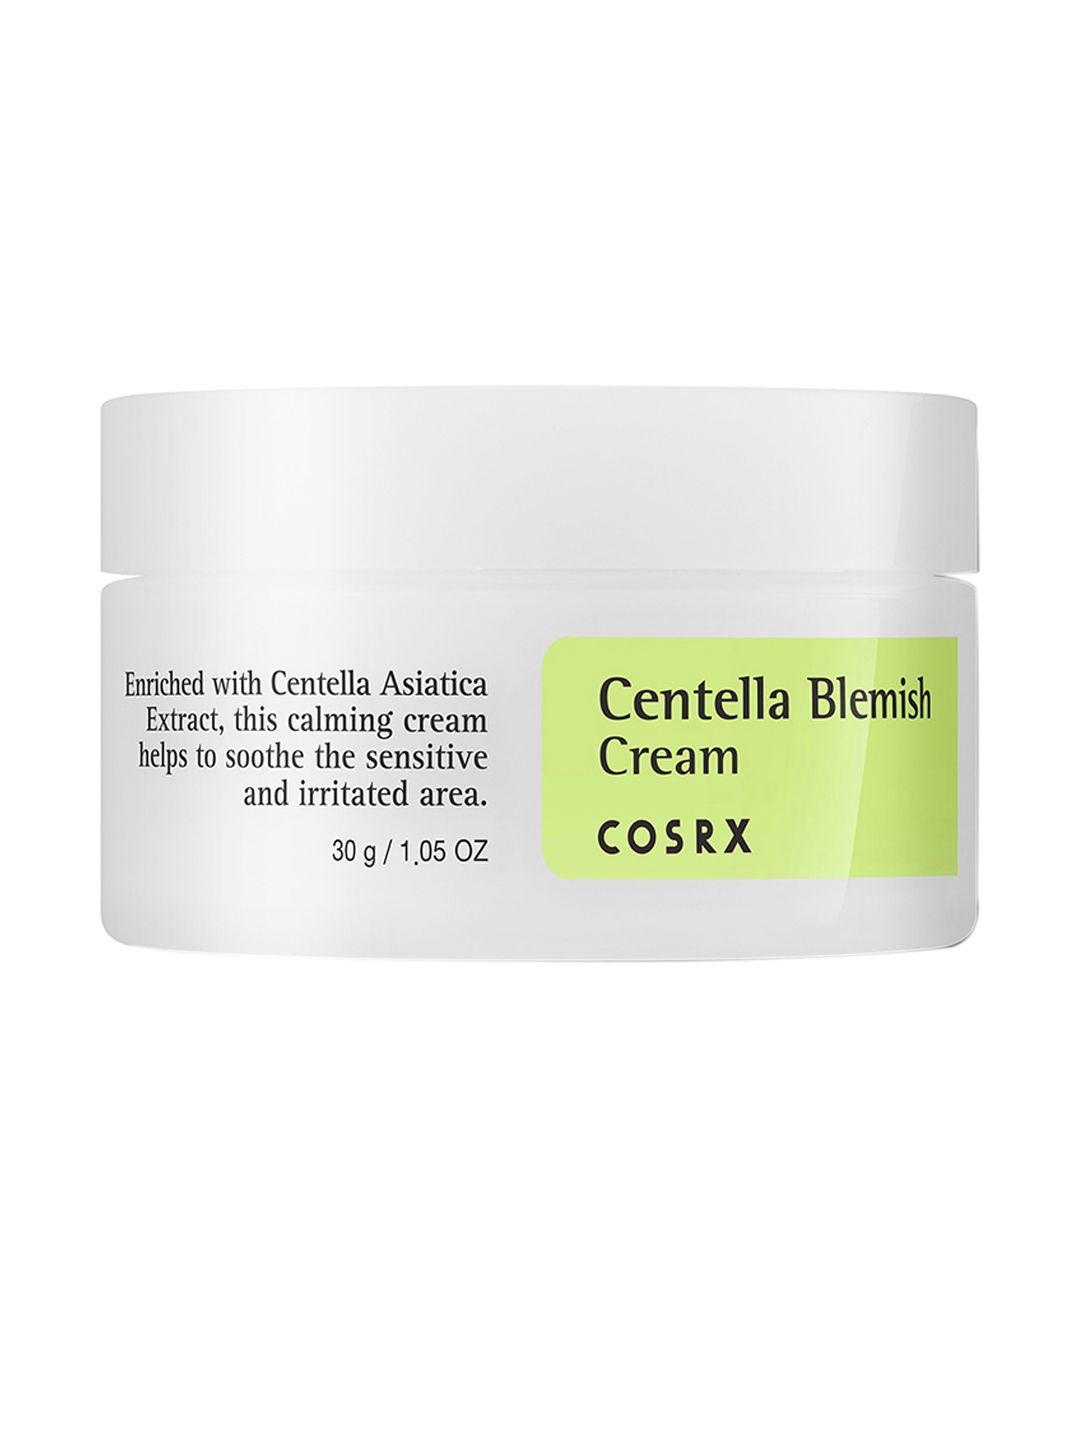 COSRX Centella Blemish Spot Cream for Post Acne Care to Soothe Sensitive Skin - 30g